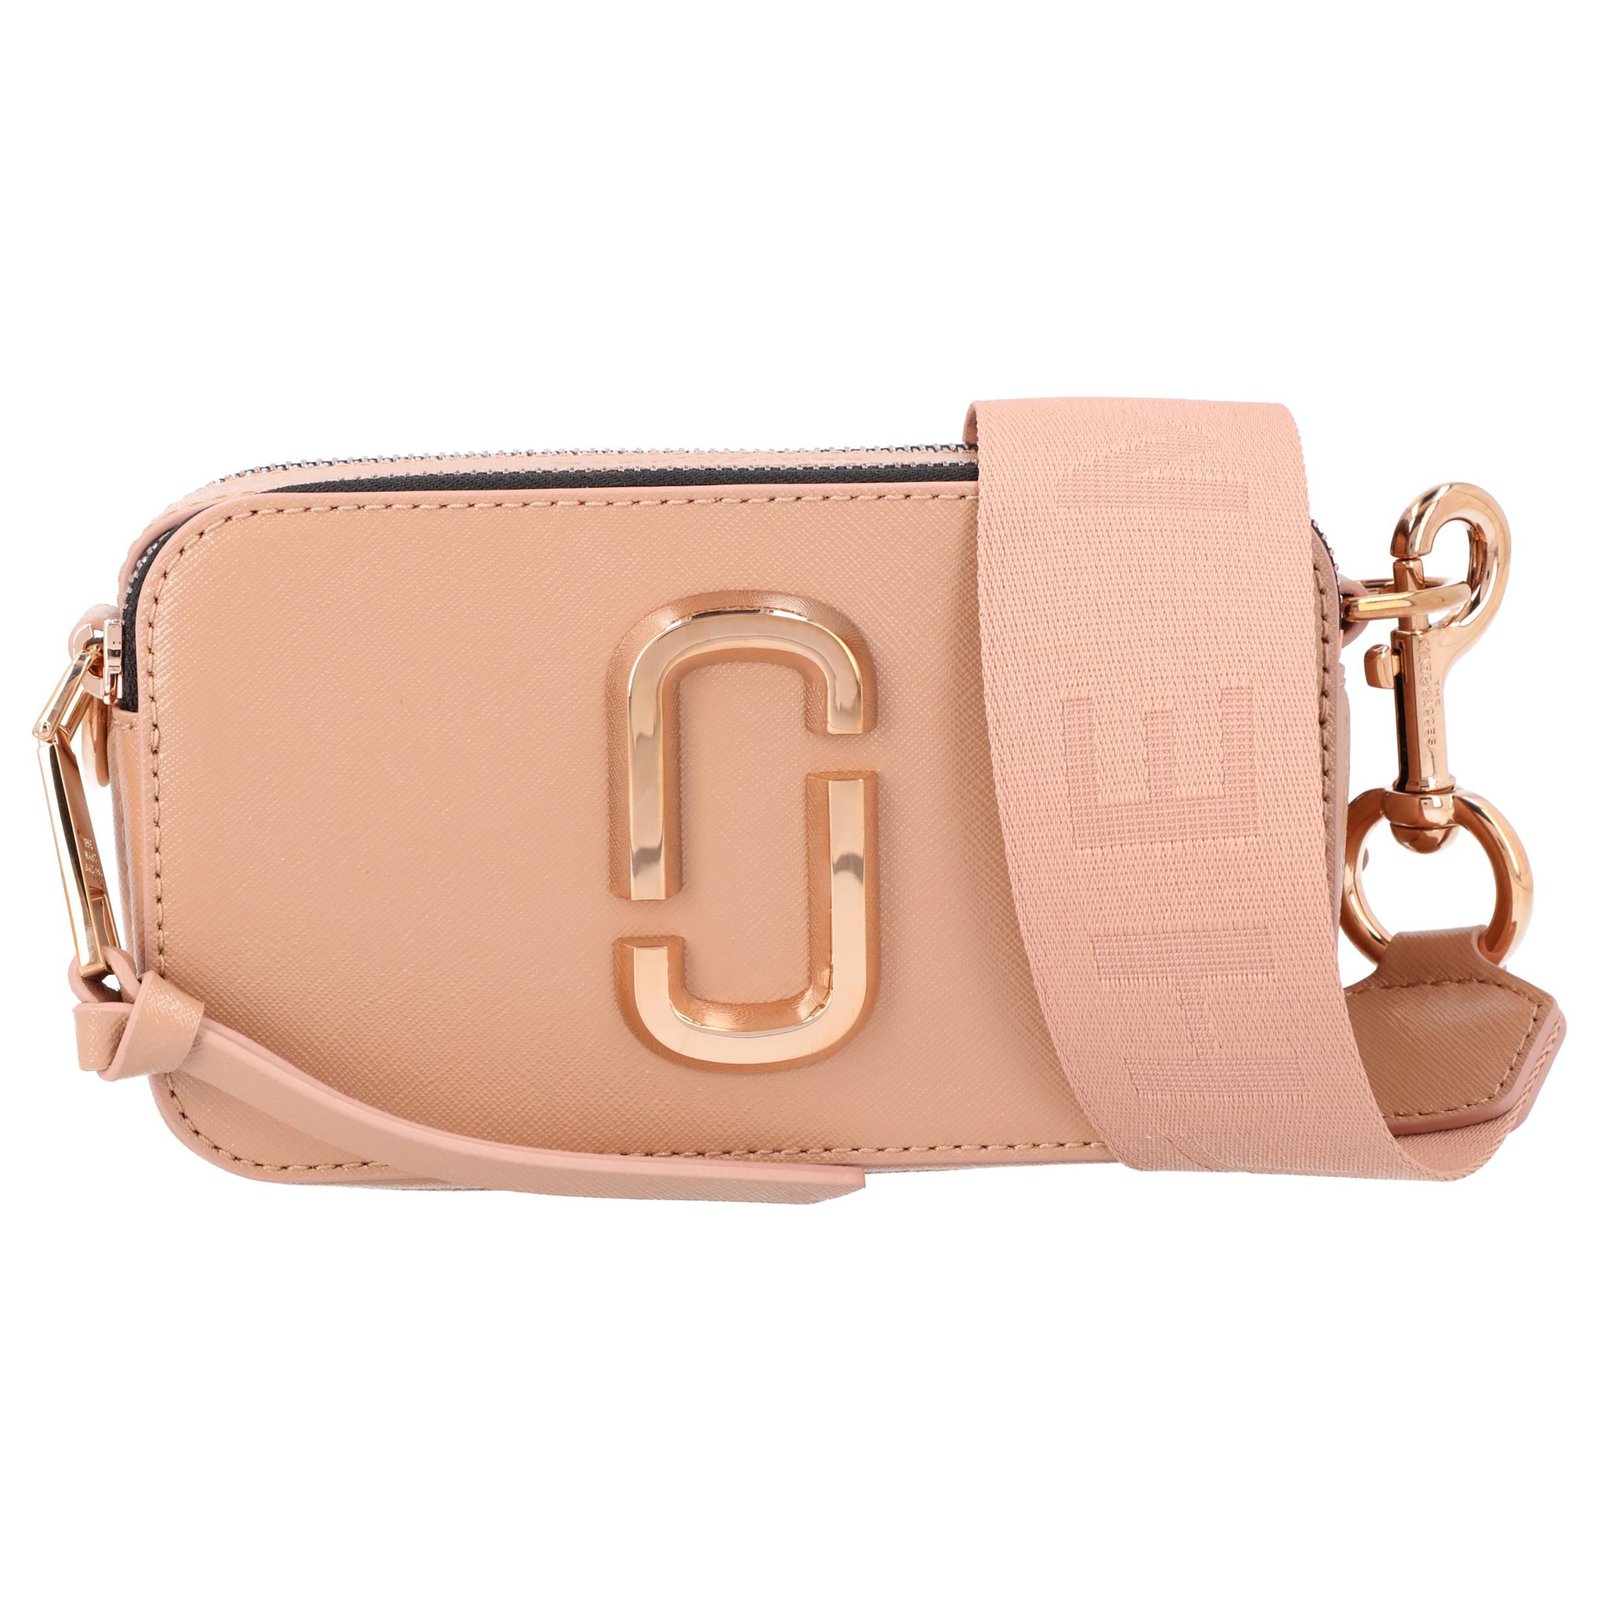 Our Marc Jacobs Snapshot Bag in Pale Pink  Marc jacobs snapshot bag, Marc  jacobs, Fashion